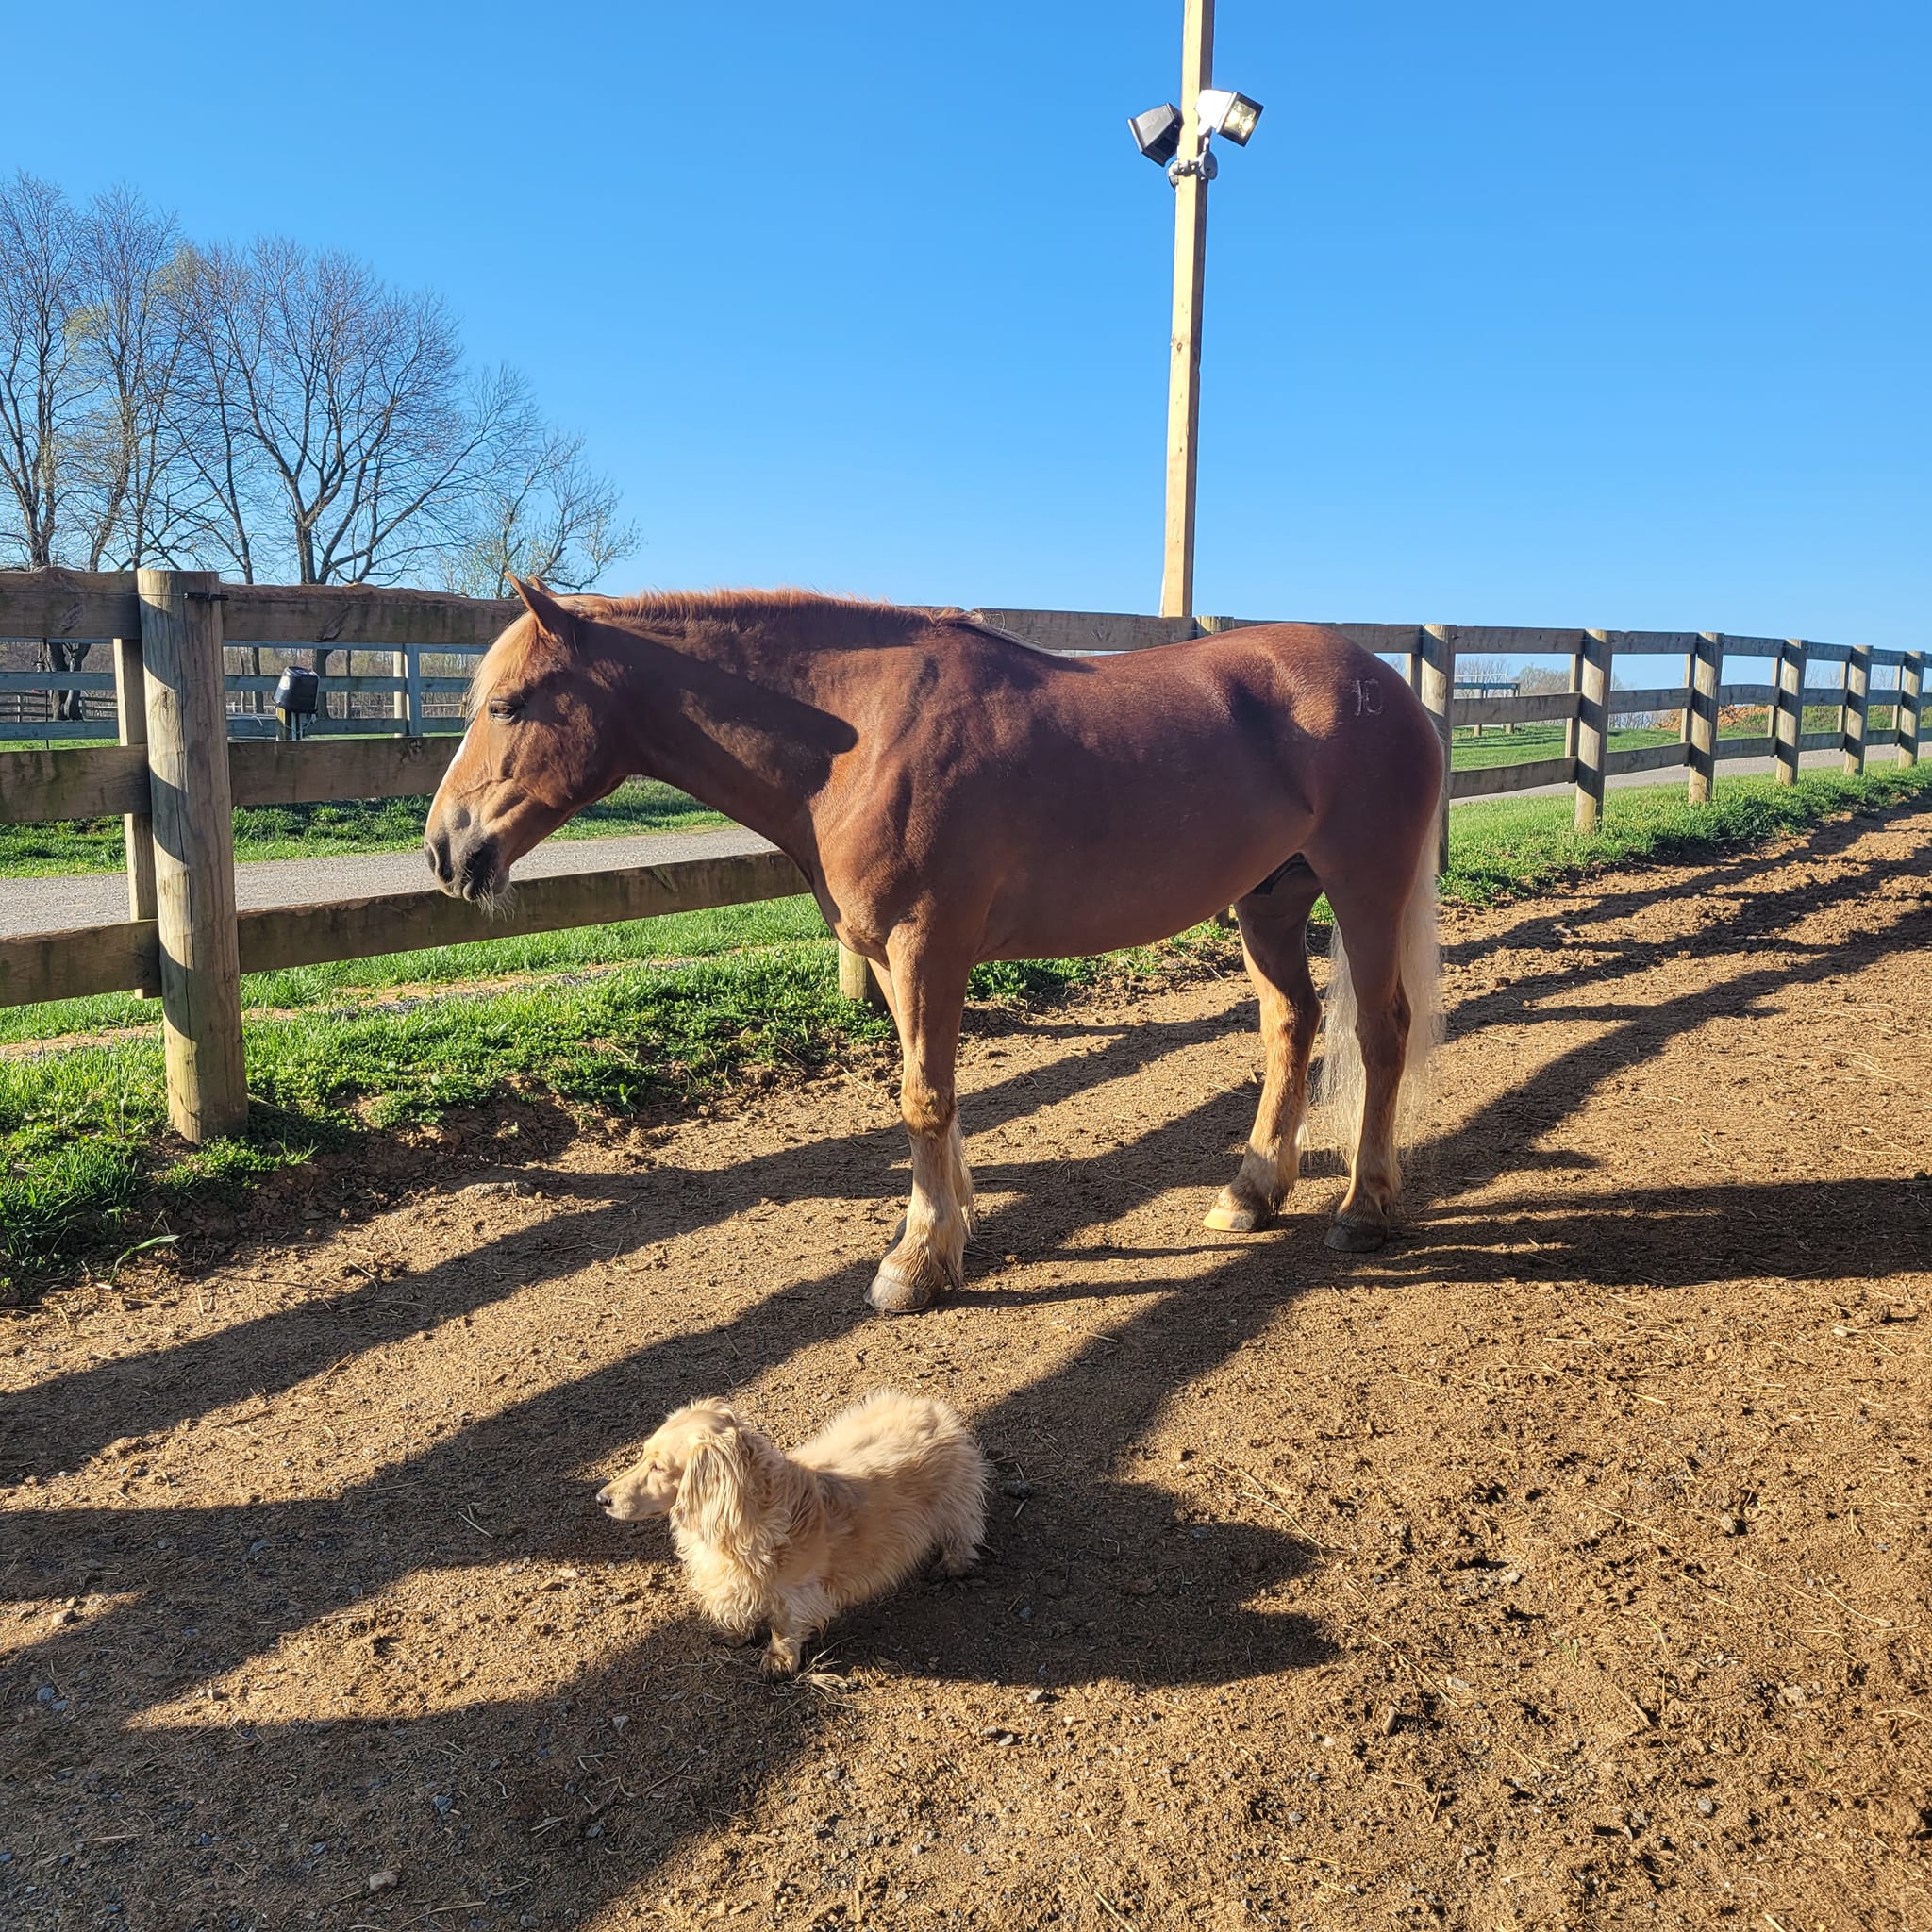 1690121854 Dachshunds on farm with horse - Emotional Support Animals